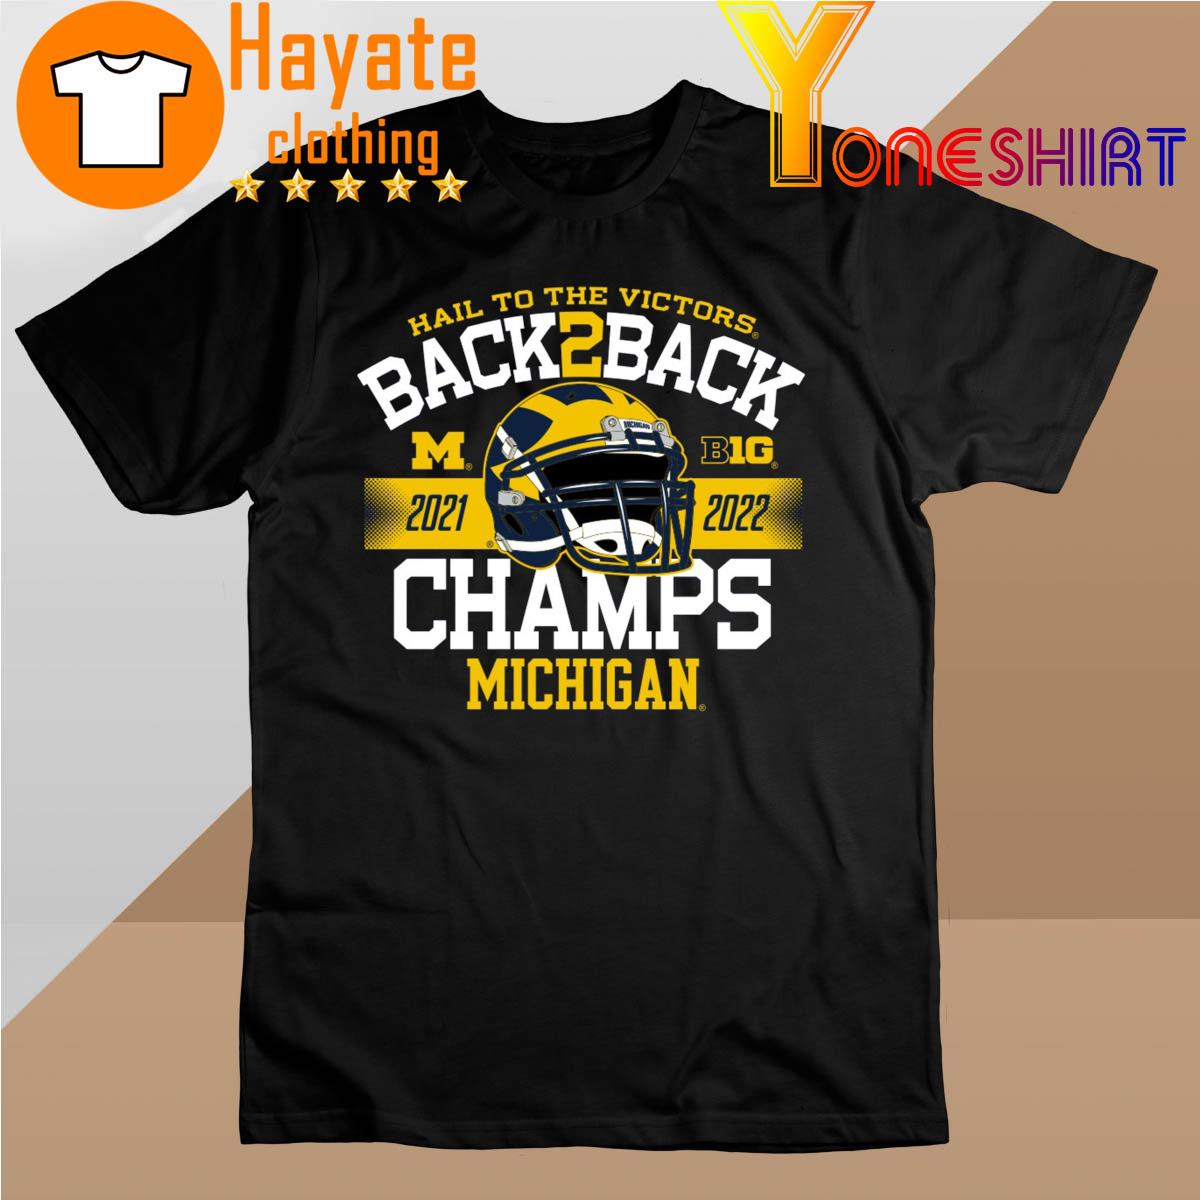 Michigan Wolverines Hail to the Victors Back 2 Back Champs 2021 2022 shirt